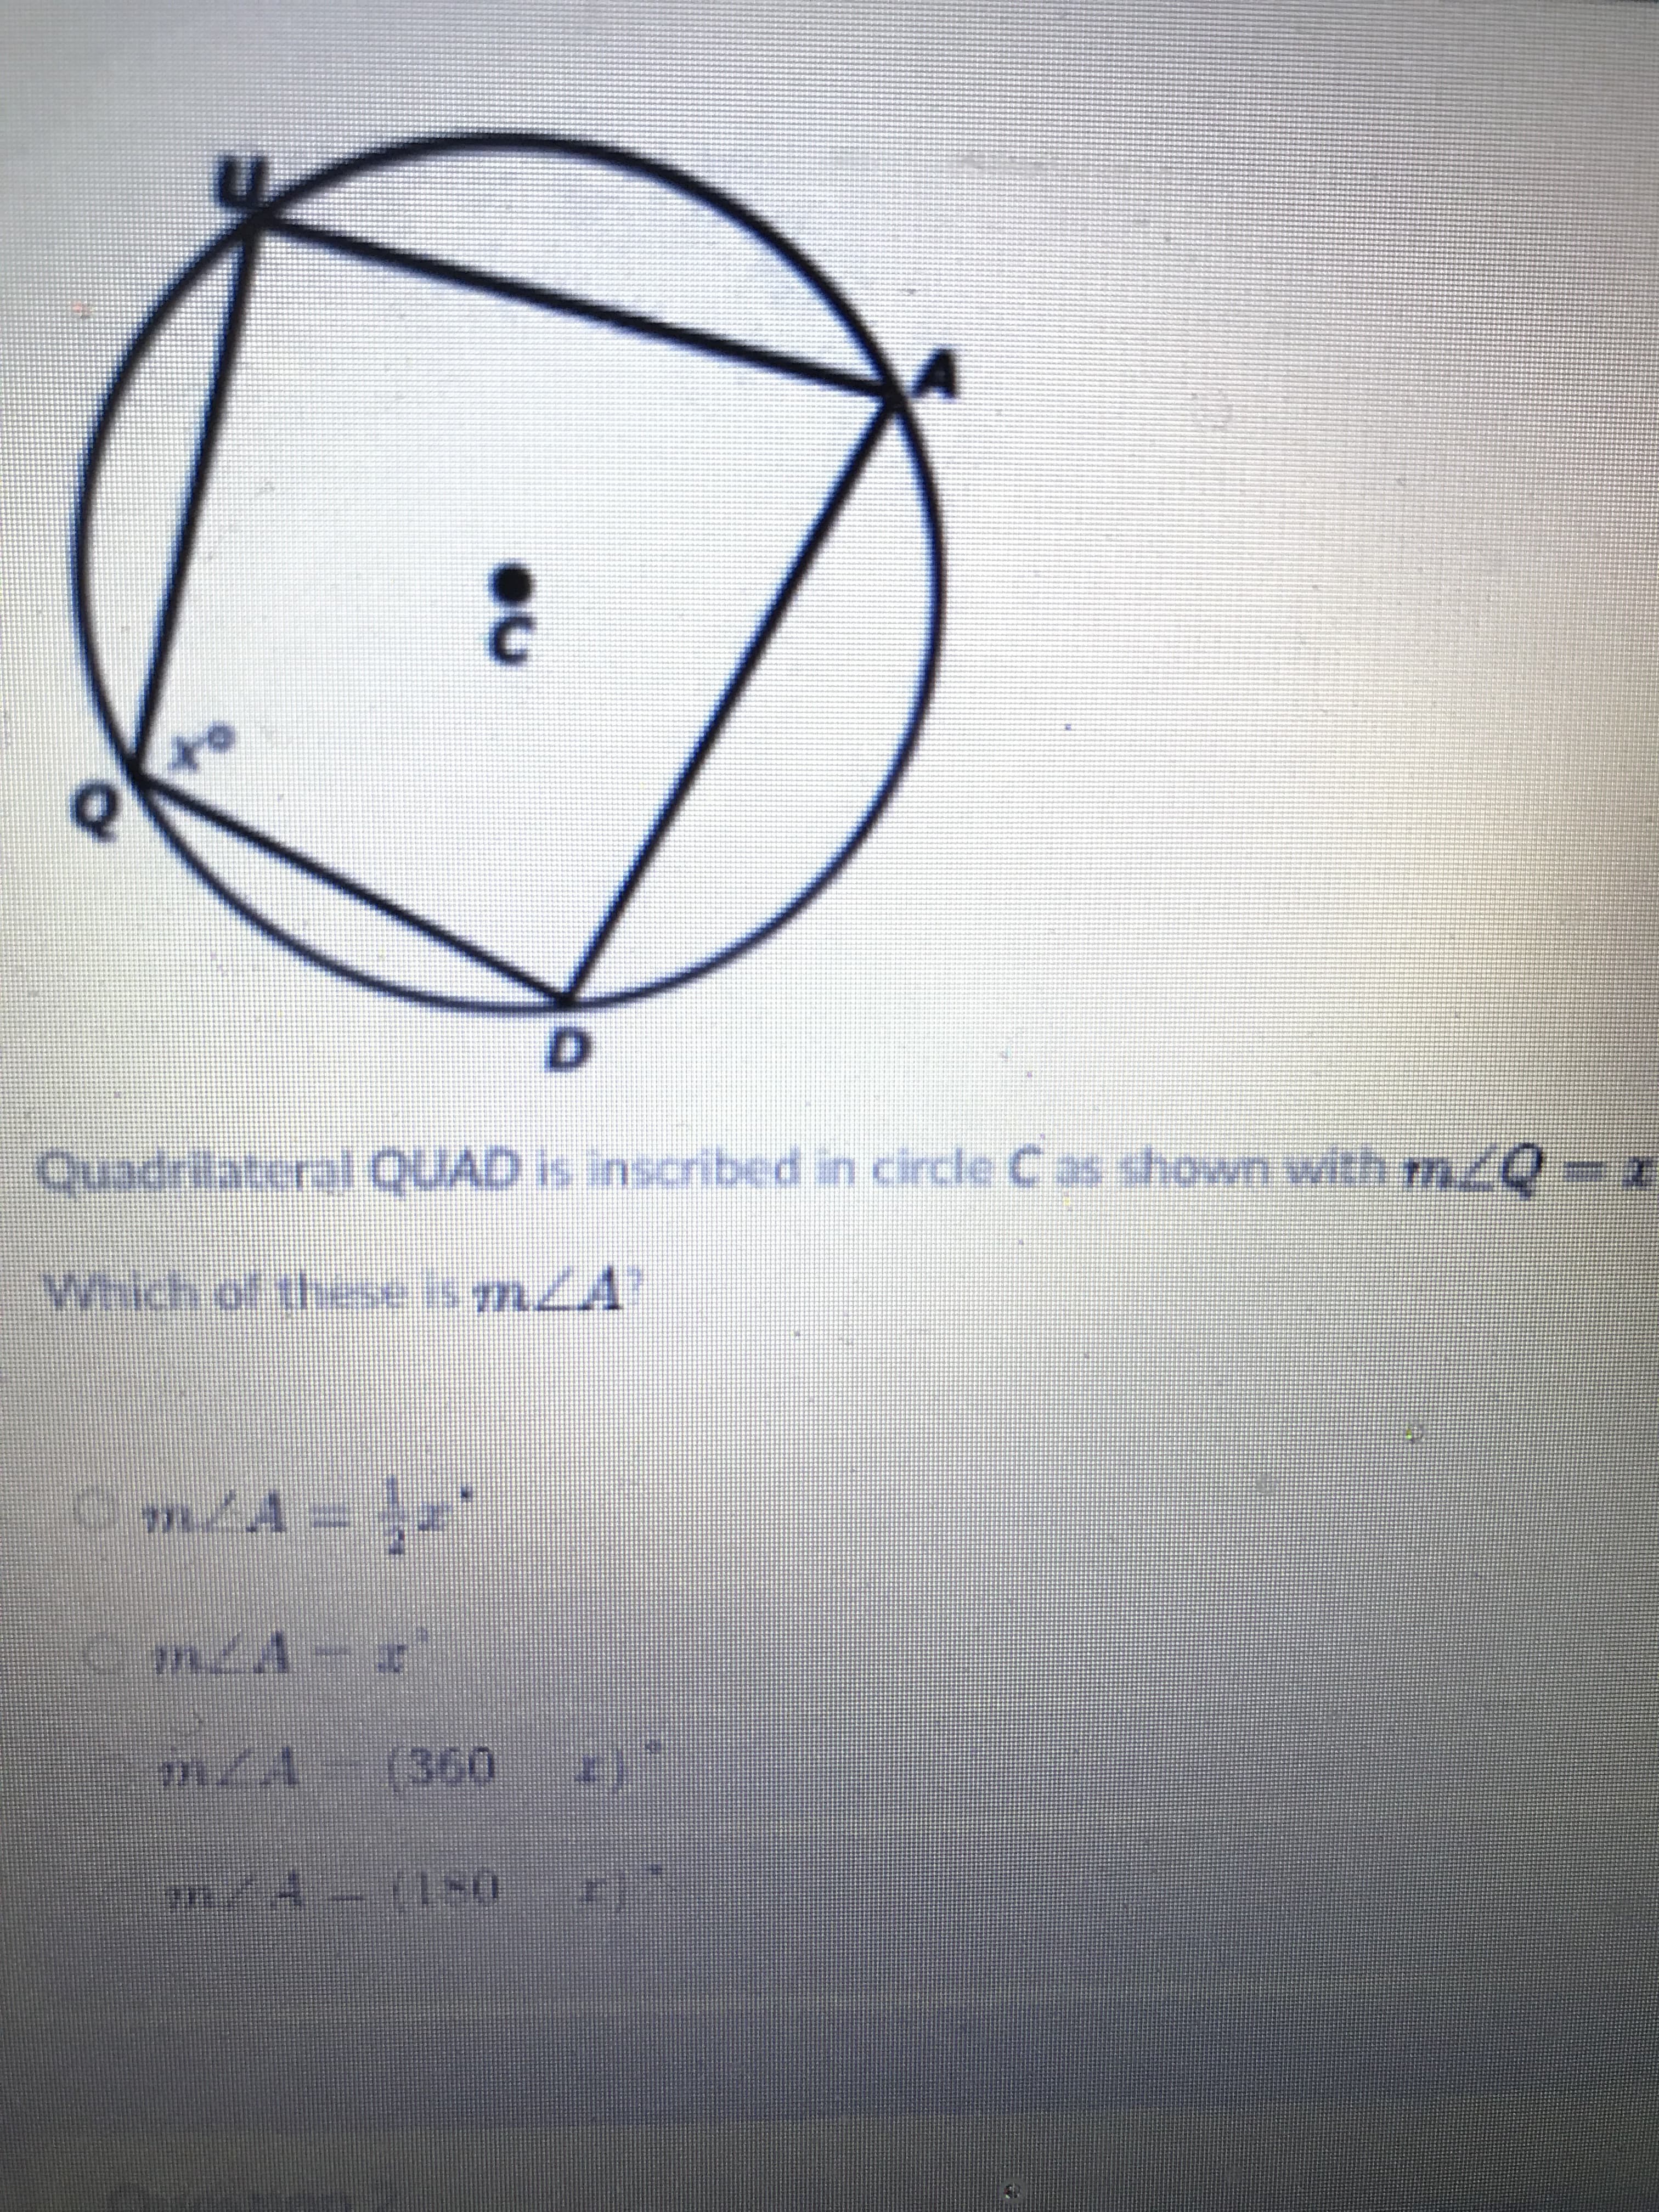 to
QUAD is inscribed in circle Cas shown with m/0
Which of
